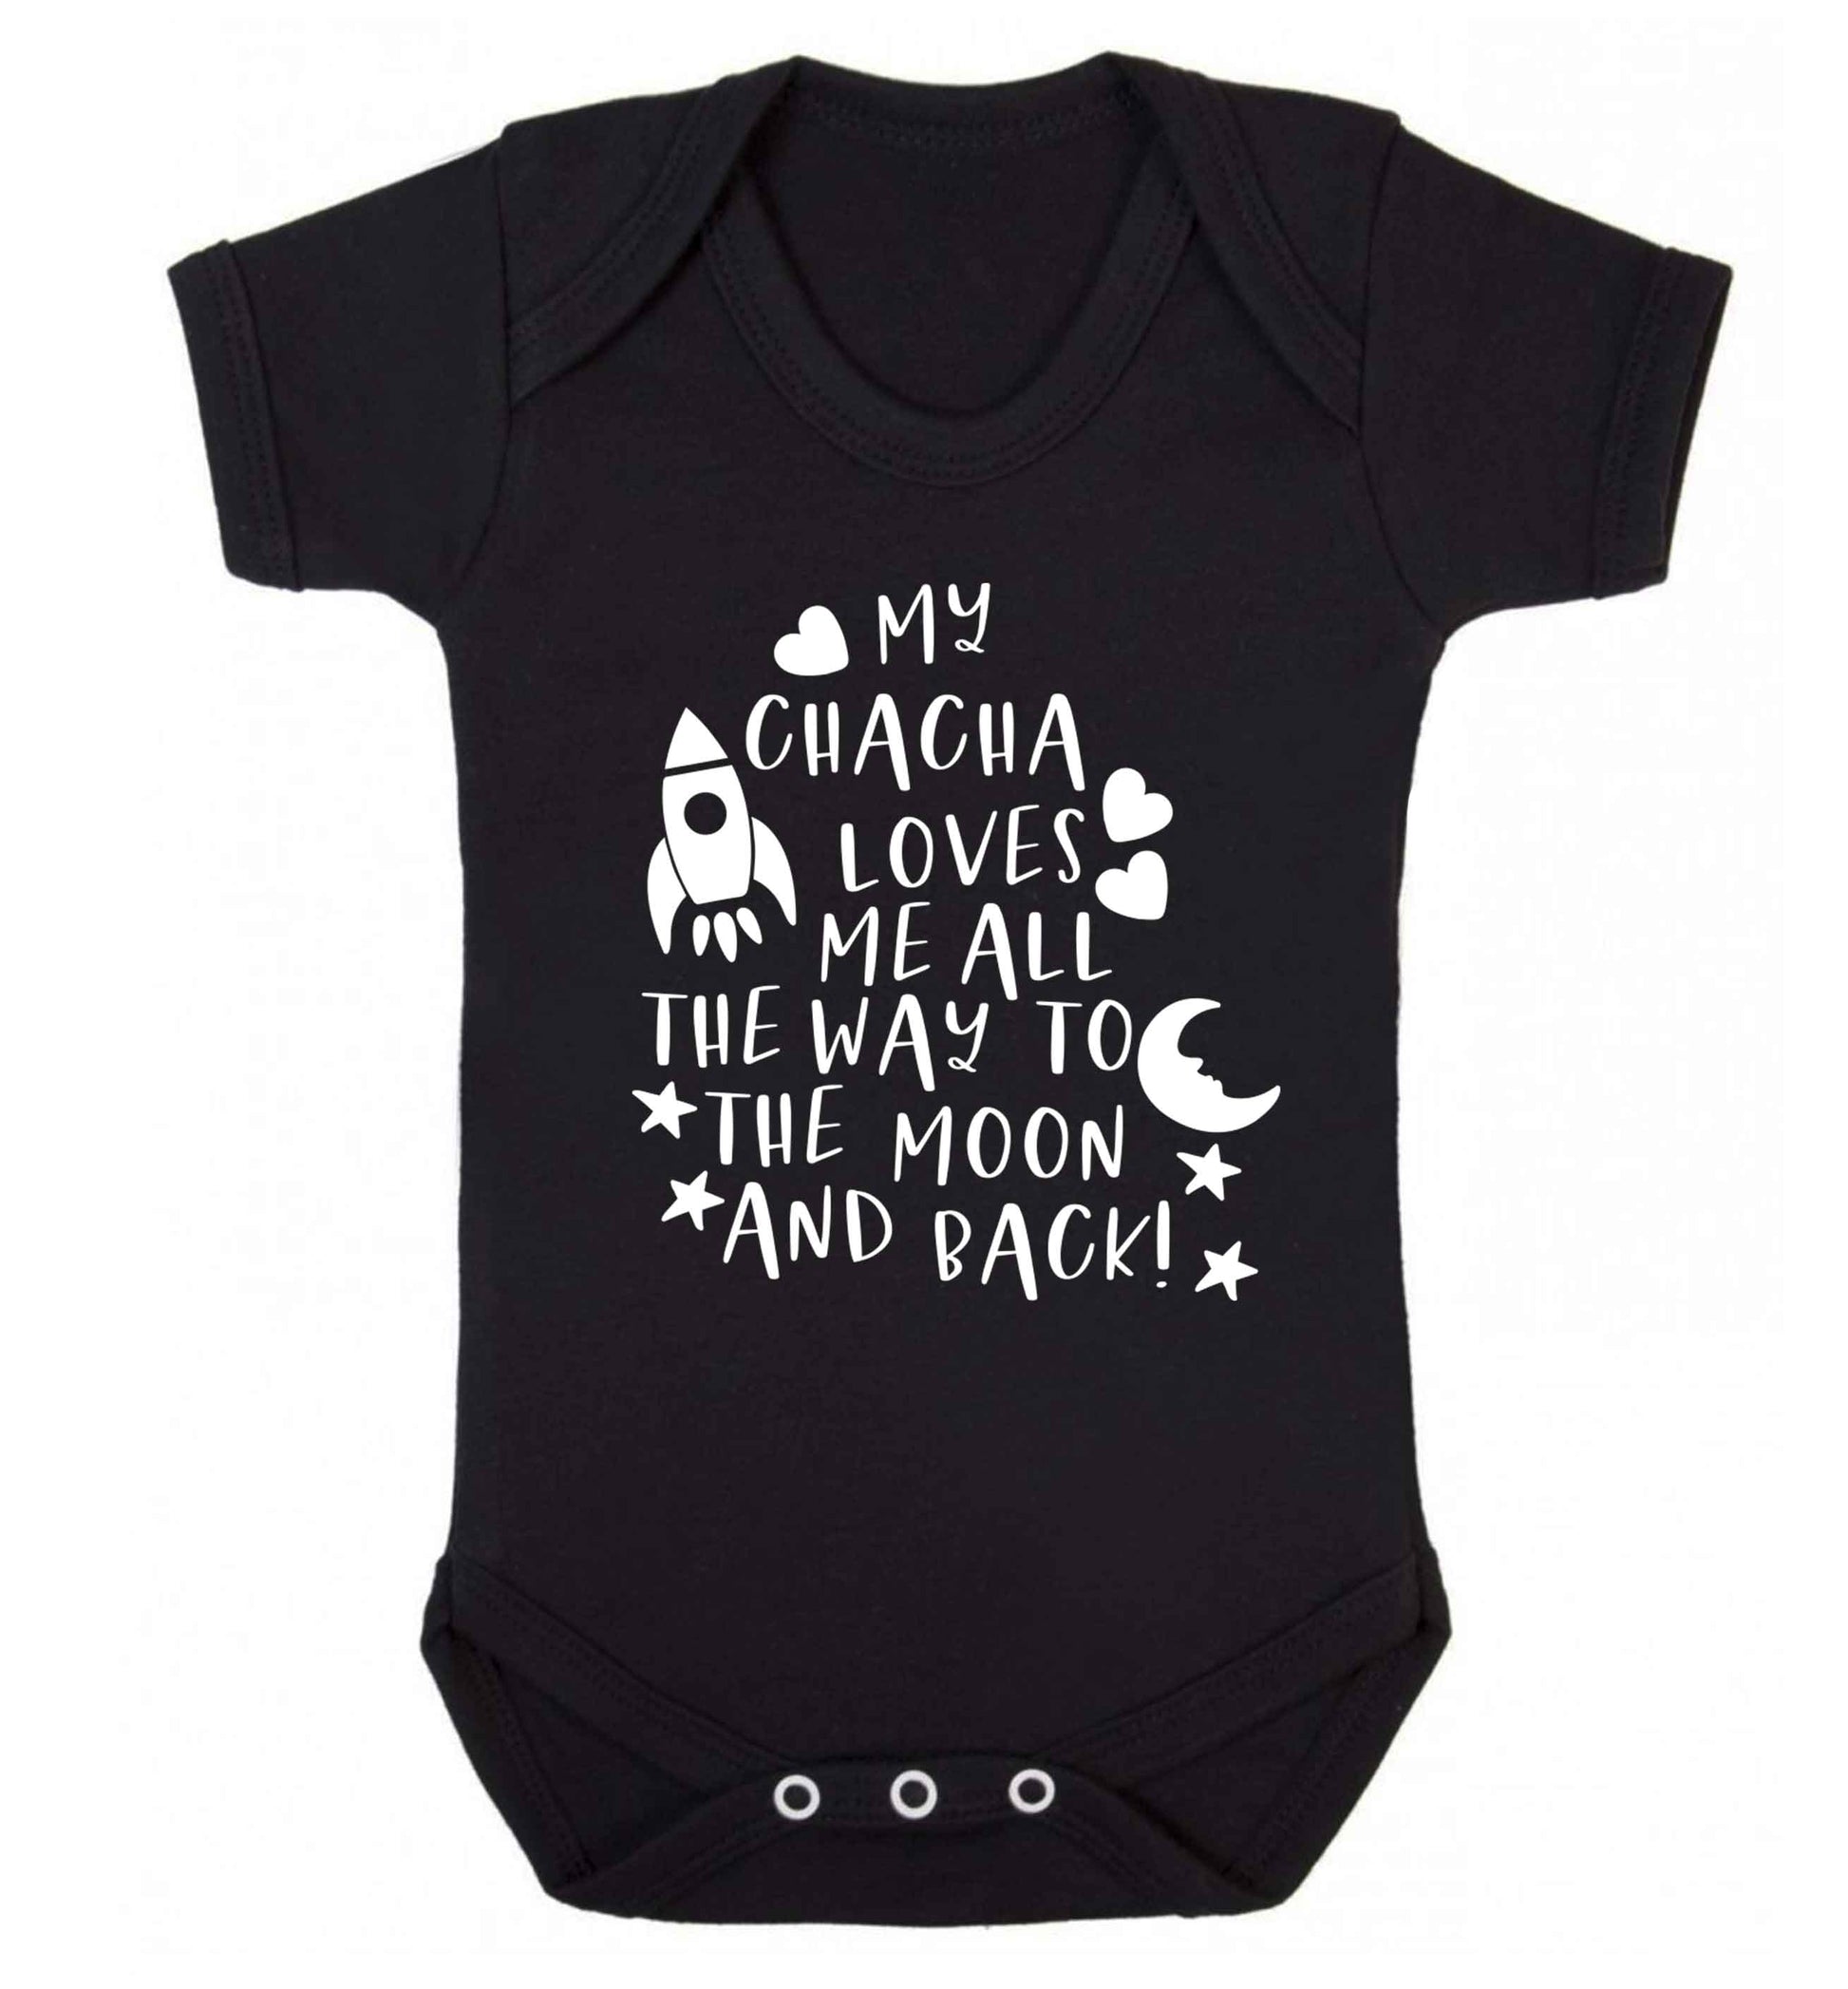 My chacha loves me all the way to the moon and back Baby Vest black 18-24 months